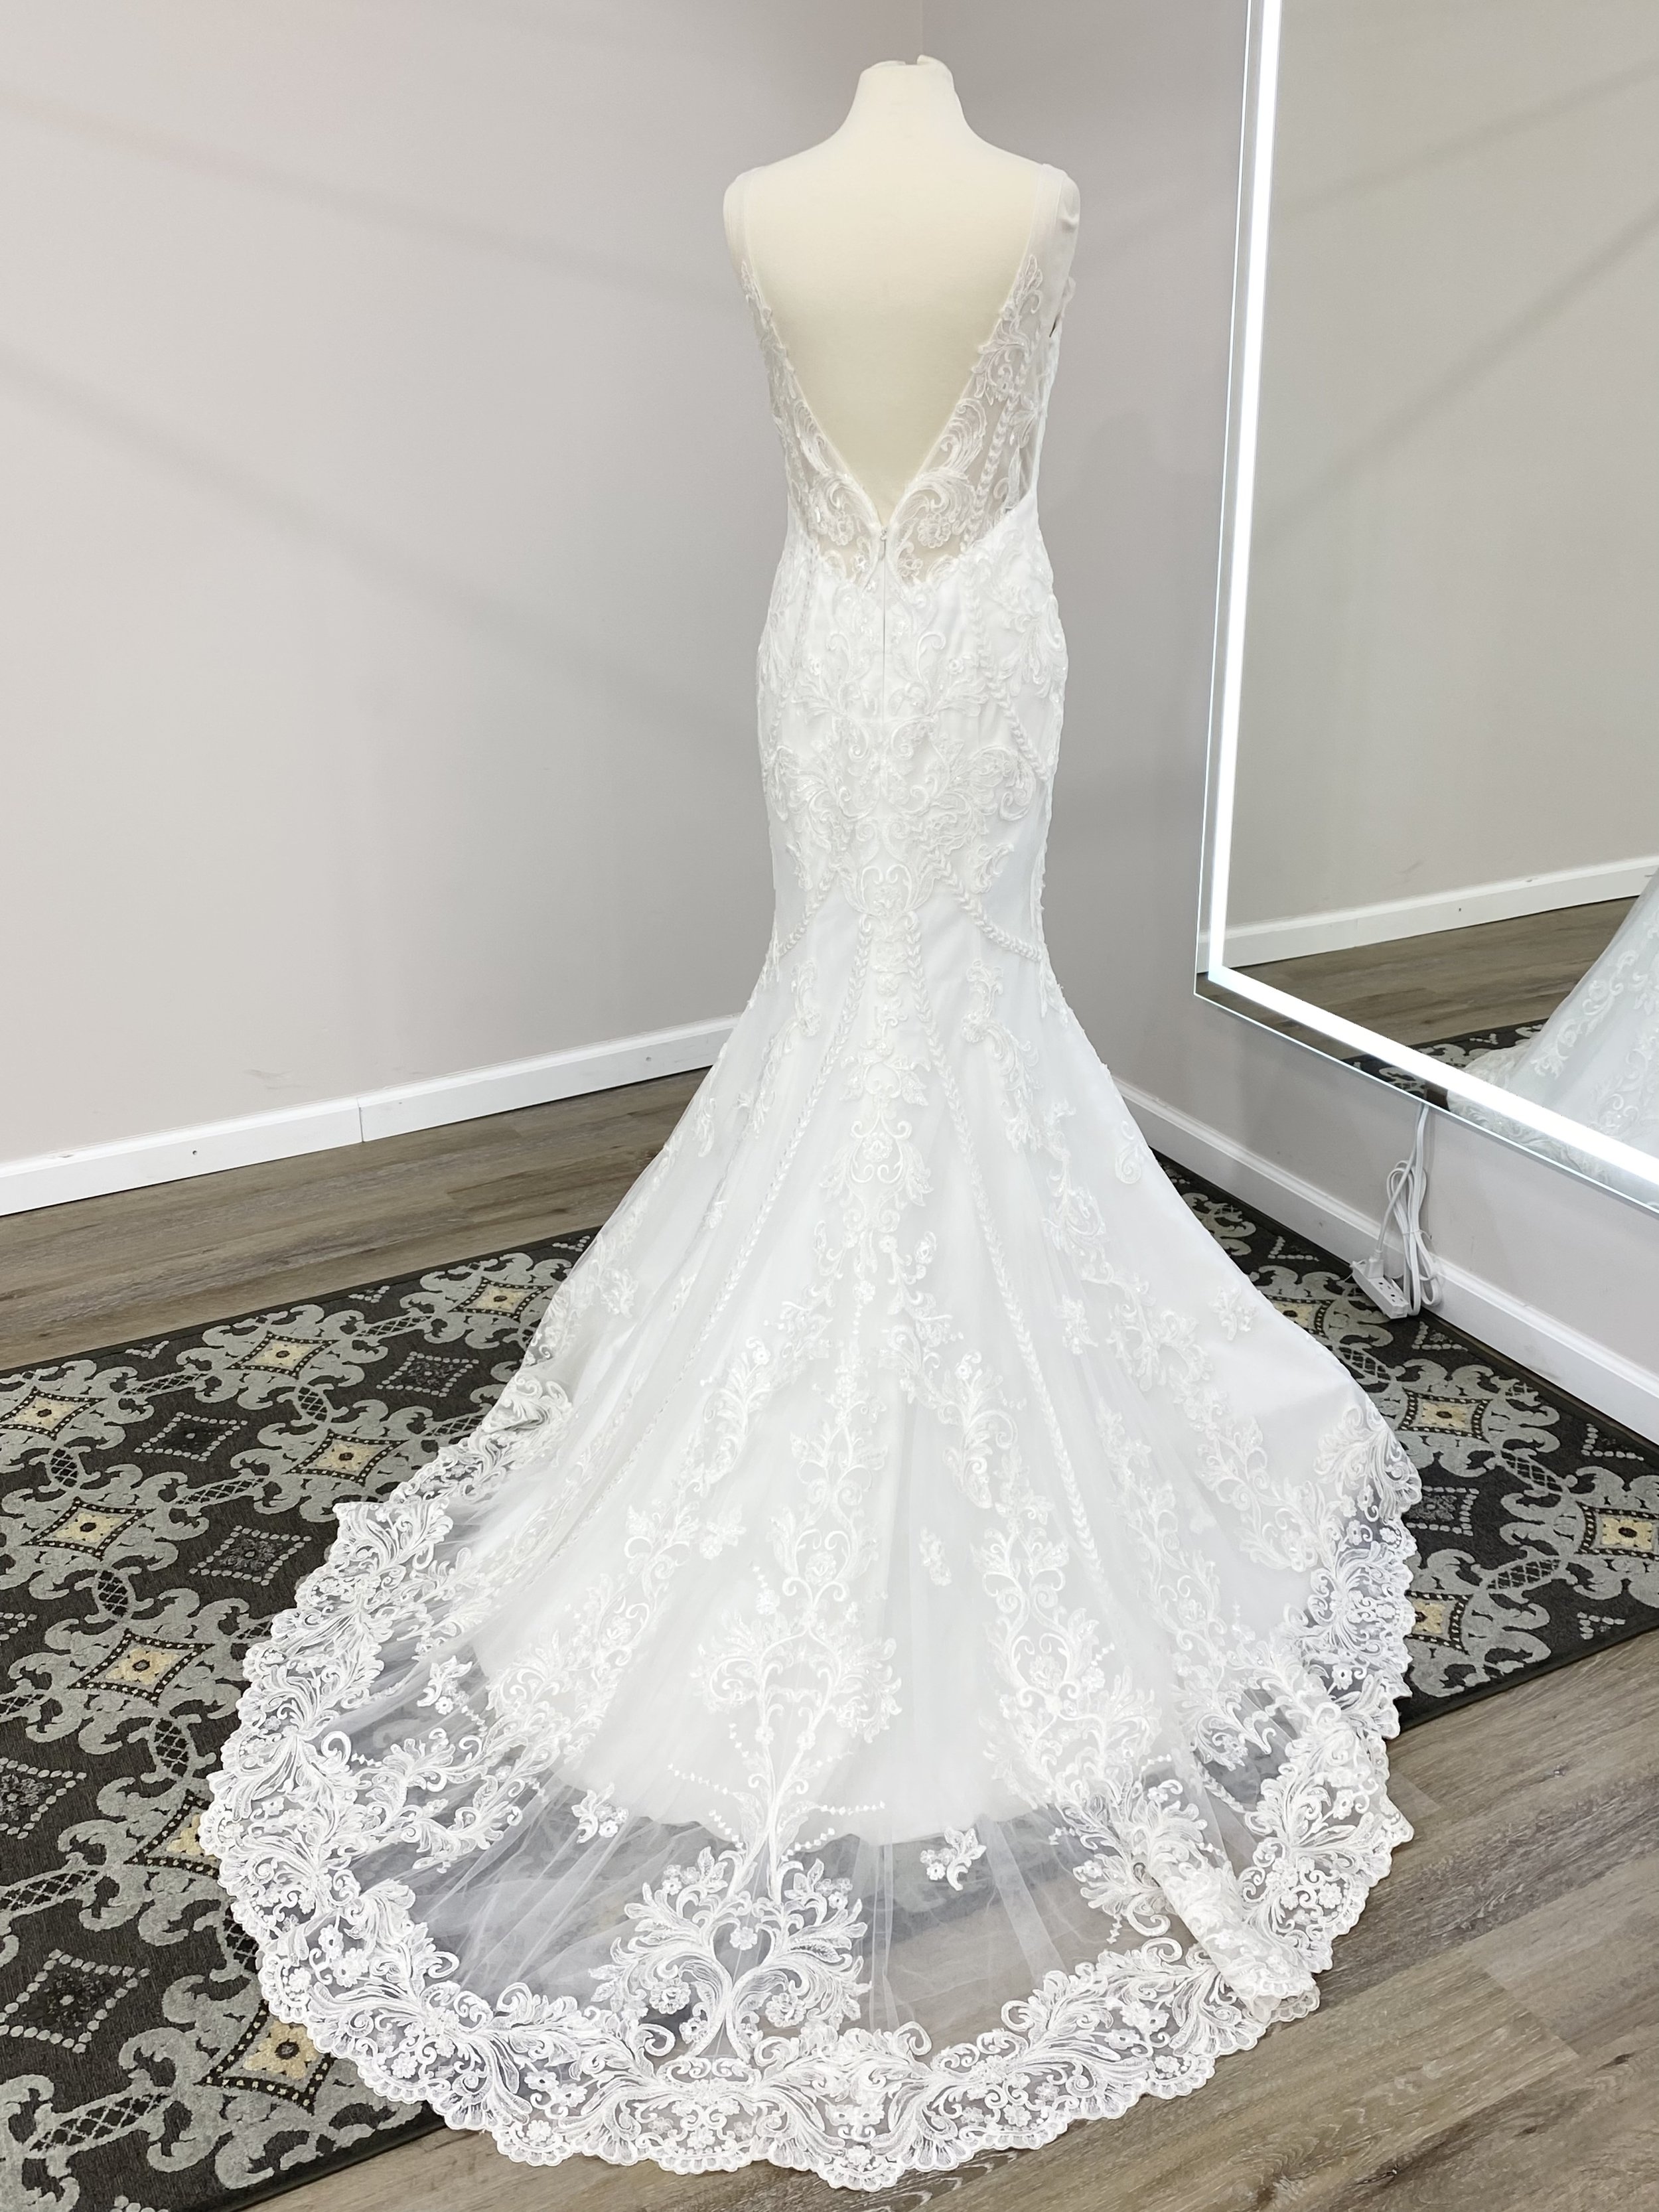 Buy Latest Wedding Gown Online At Best Price